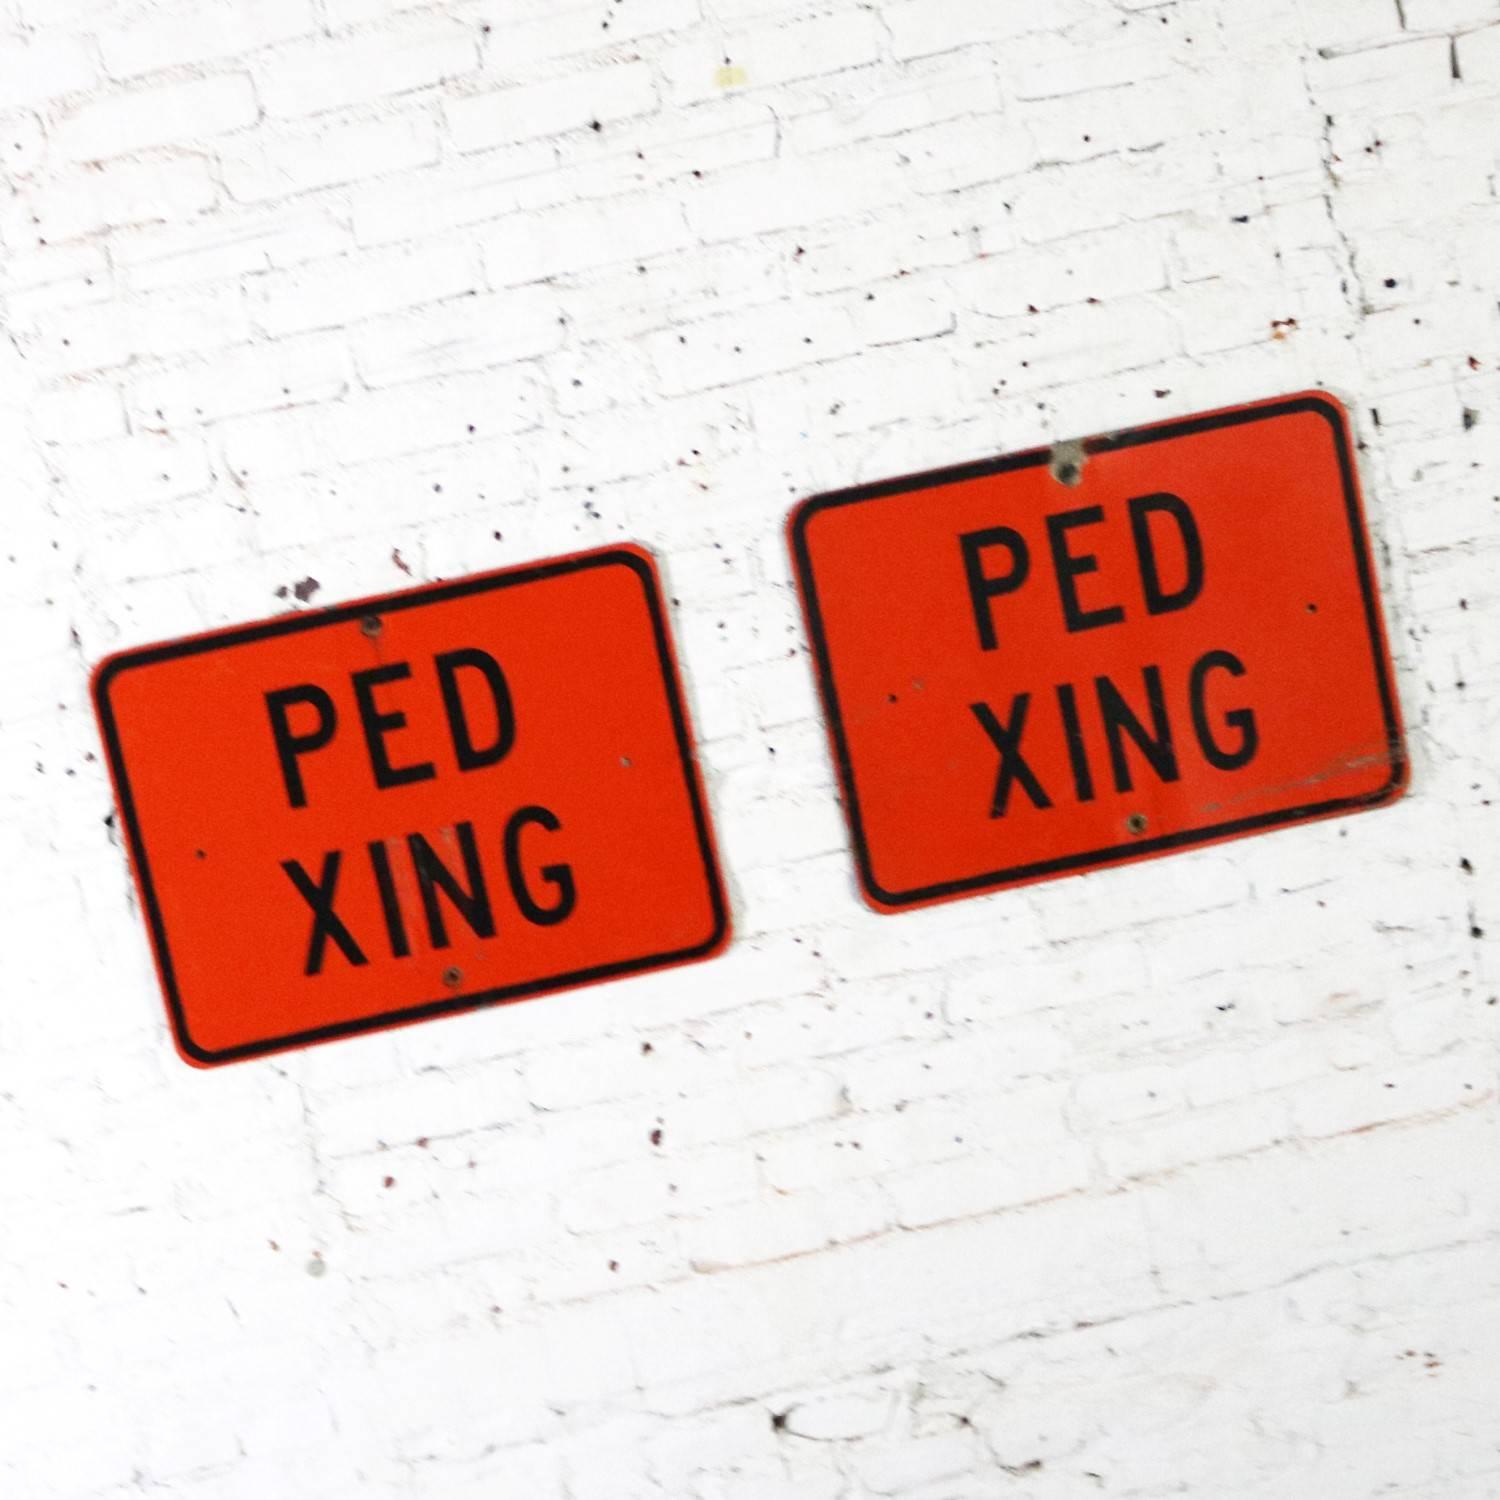 ped xing sign meaning